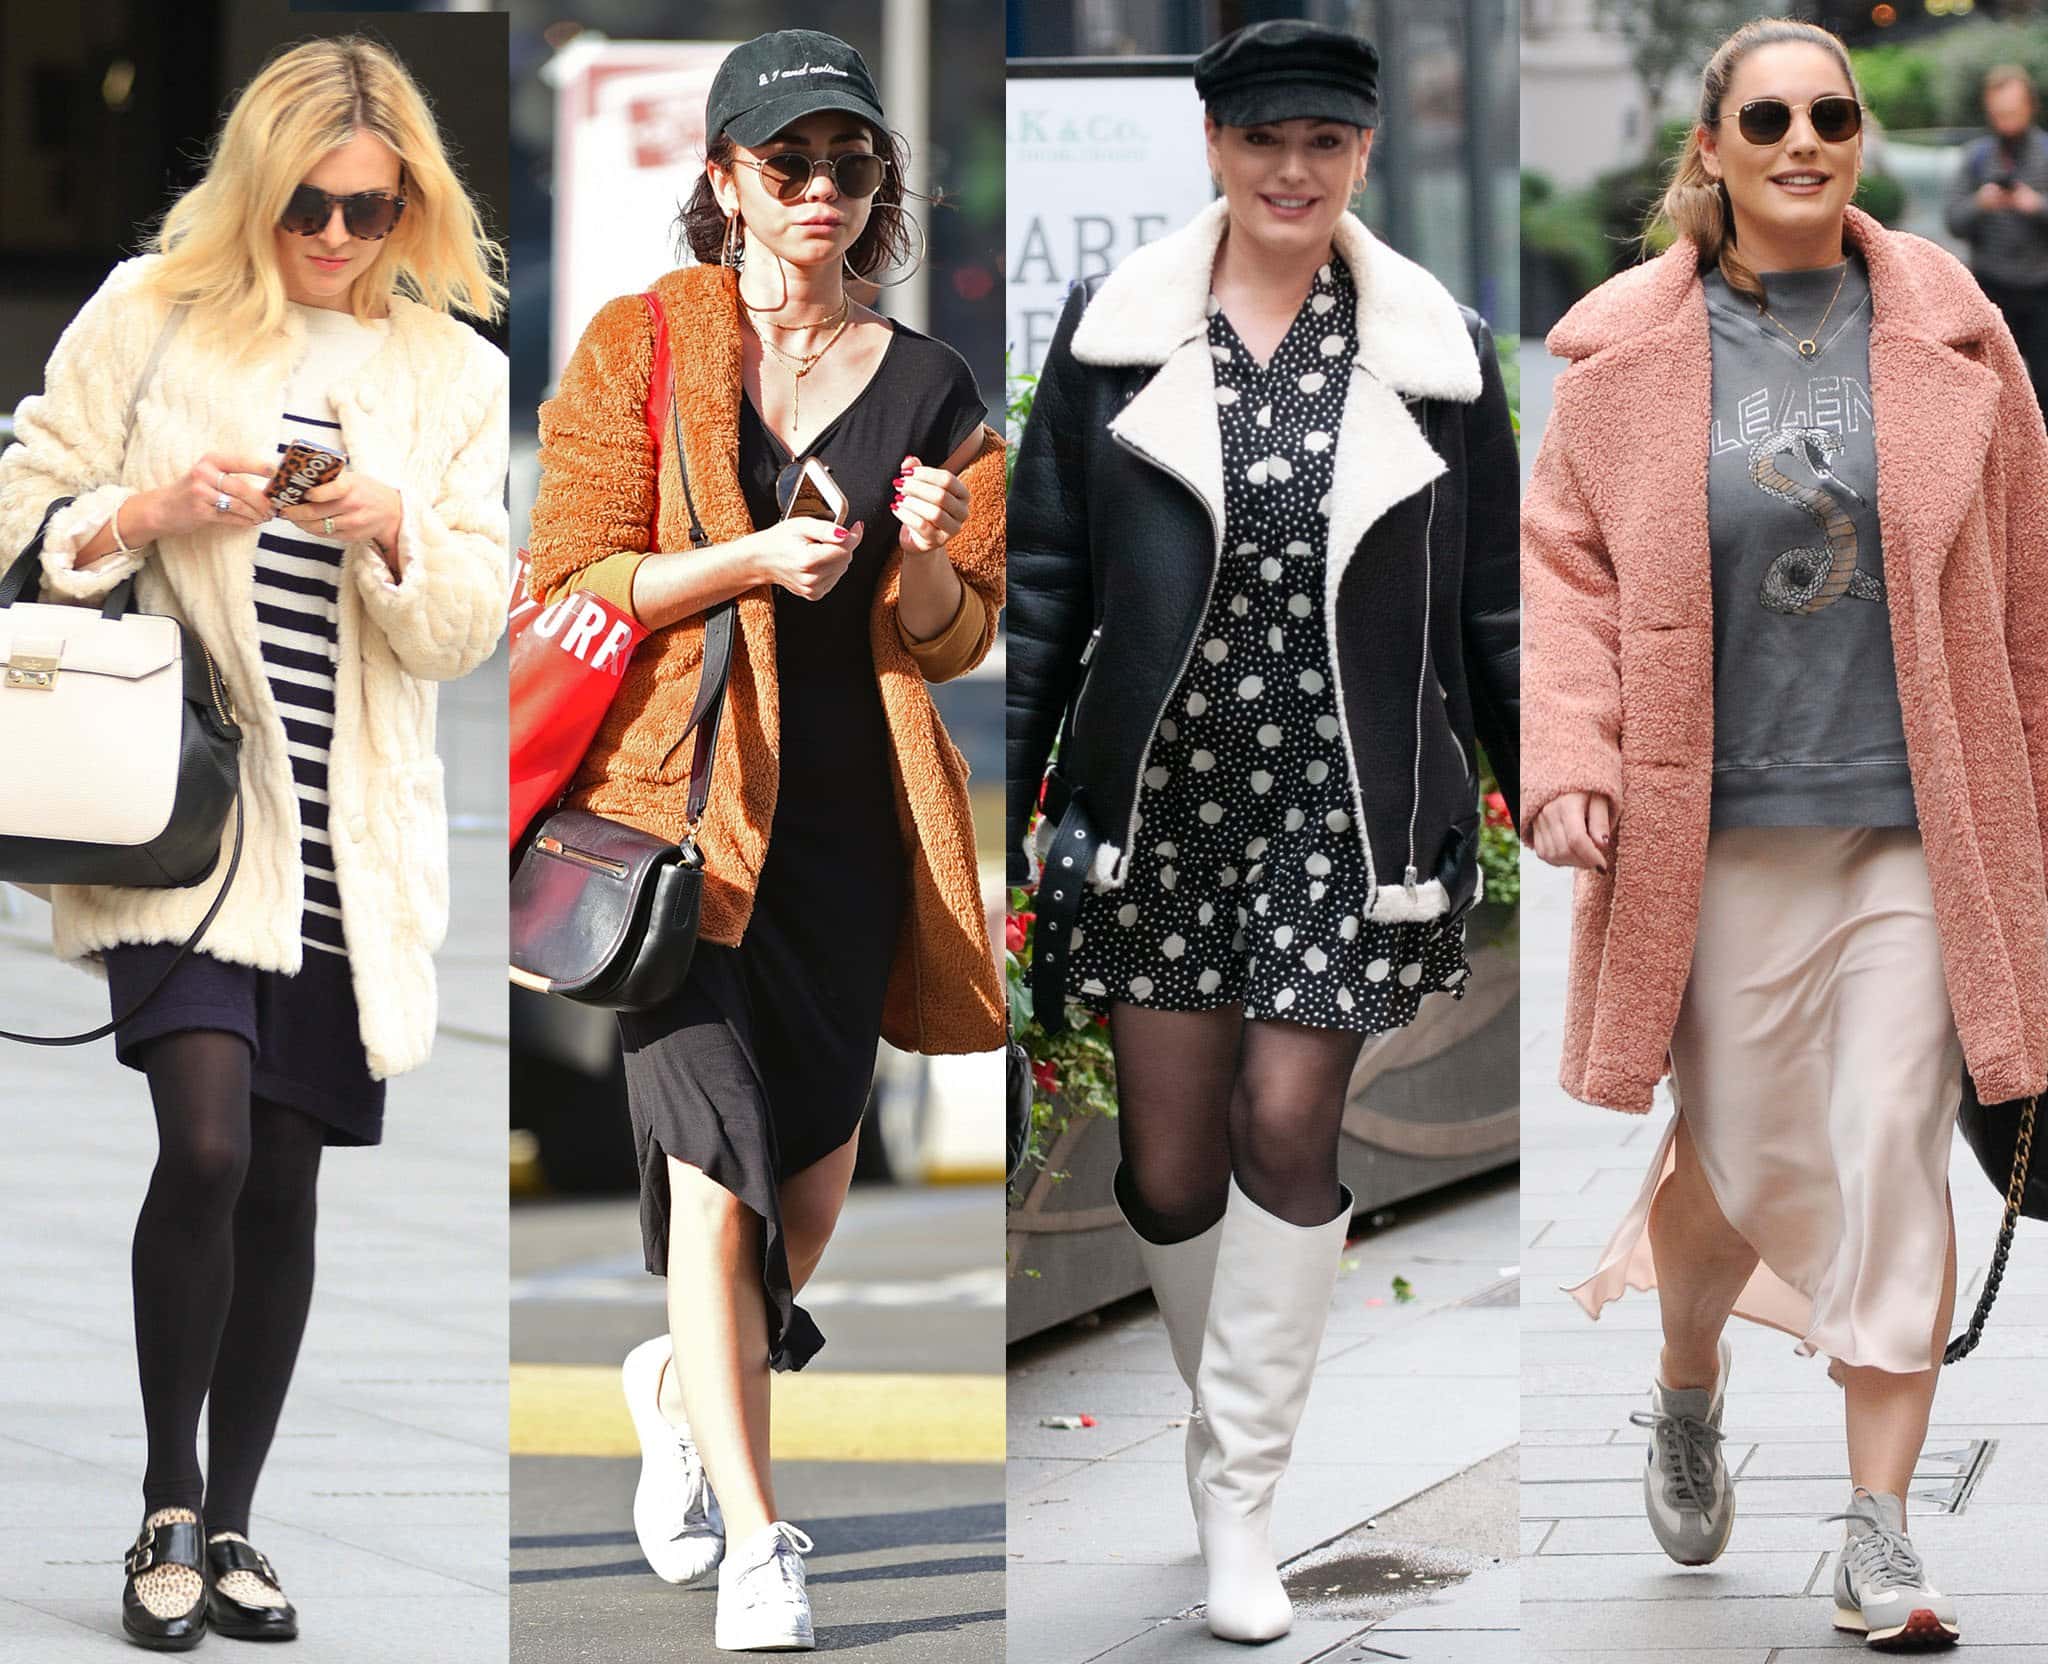 Elegant and Versatile: Fearne Cotton, Sarah Hyland, and Kelly Brook illustrate the art of dressing up, layering fleece jackets over dresses for a look that's both sophisticated and cozy